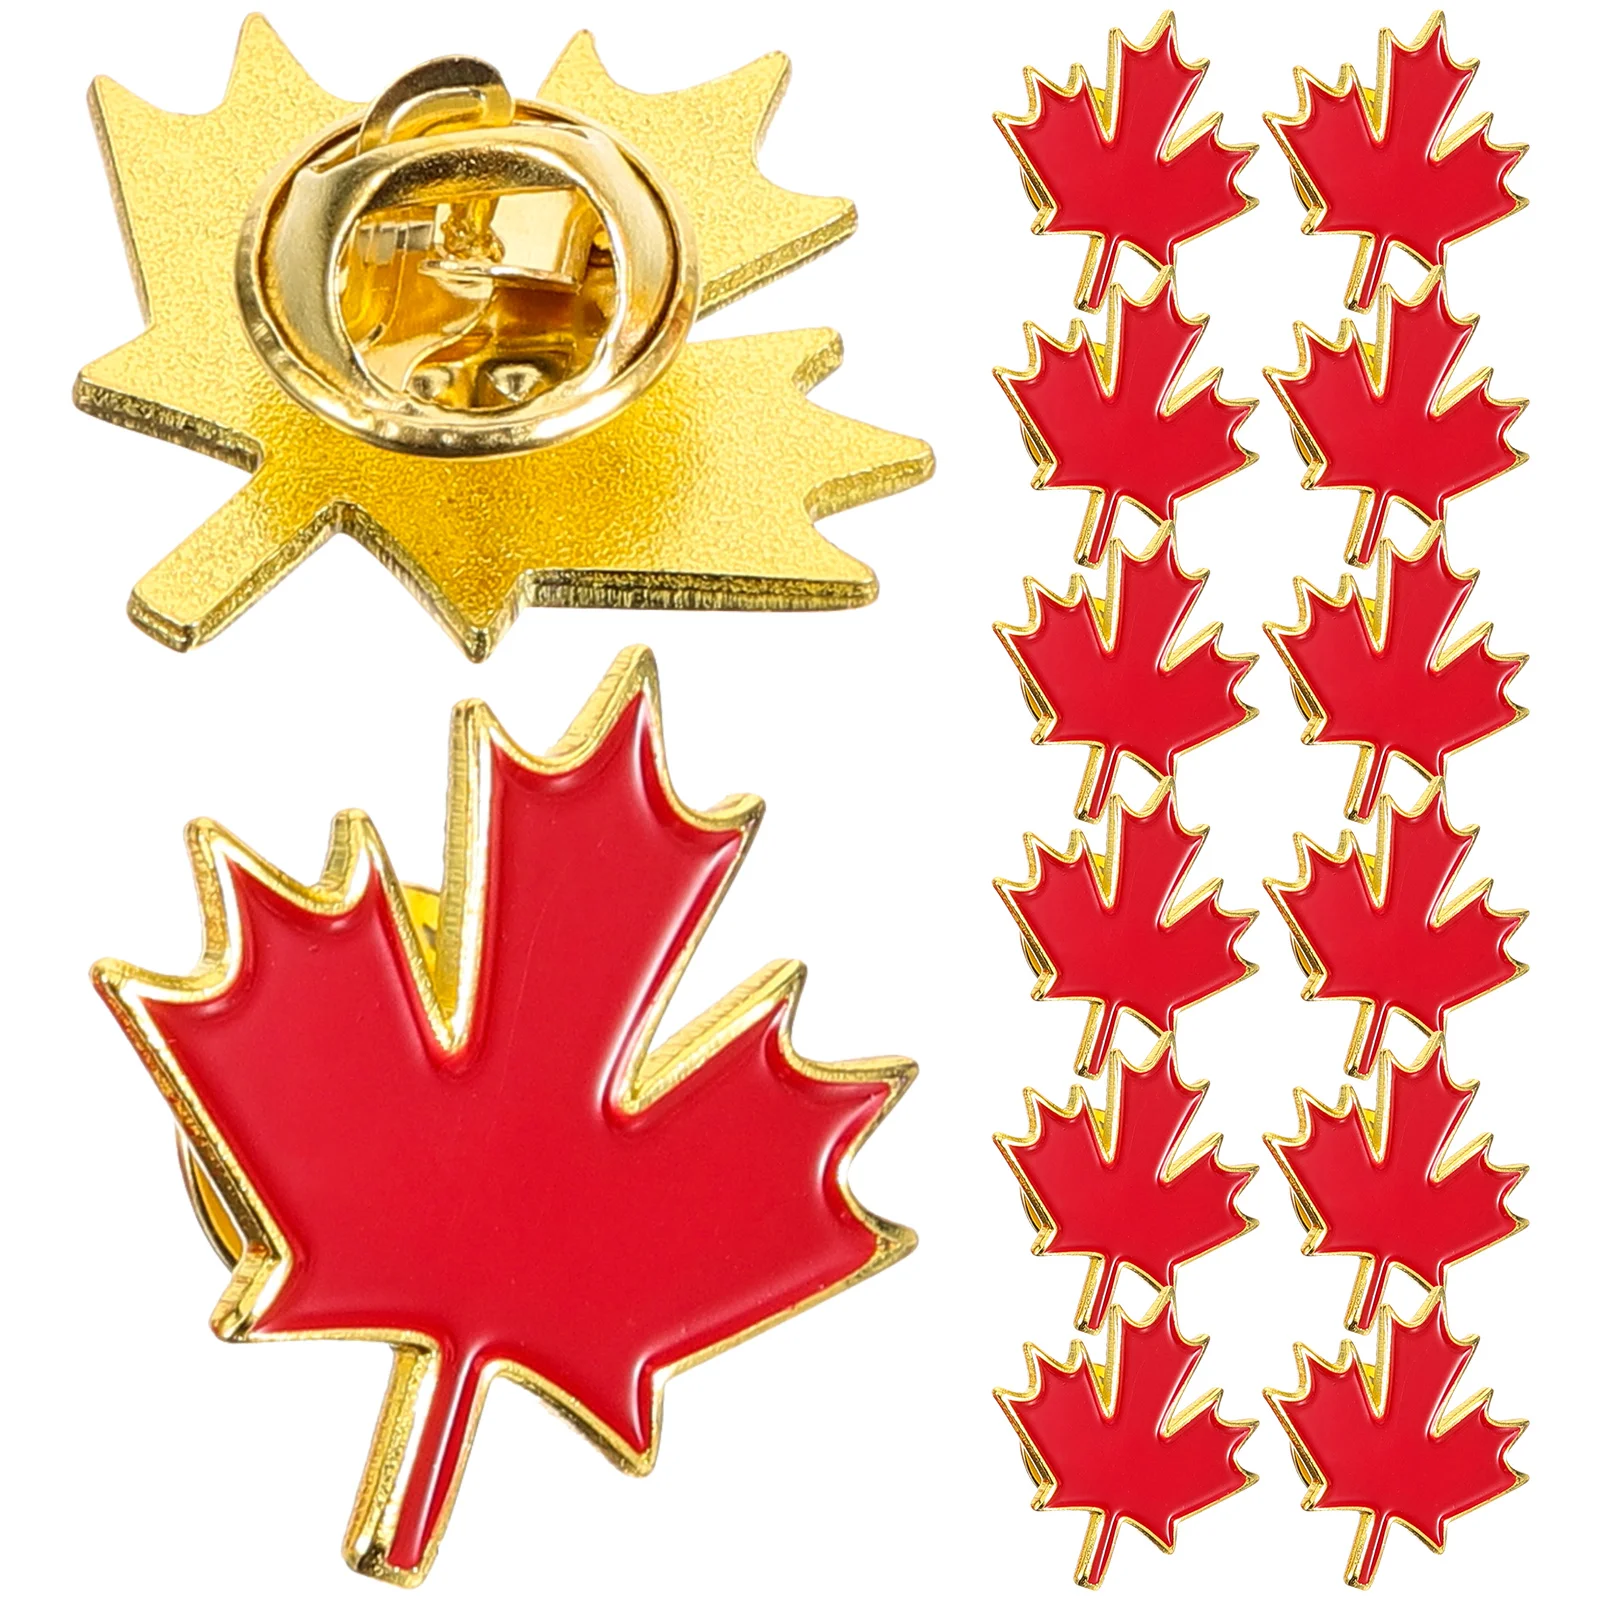 

20pcs Maple Leaf Brooches Metal Breastpins Clothes Decorative Badges Festival Brooch Gifts